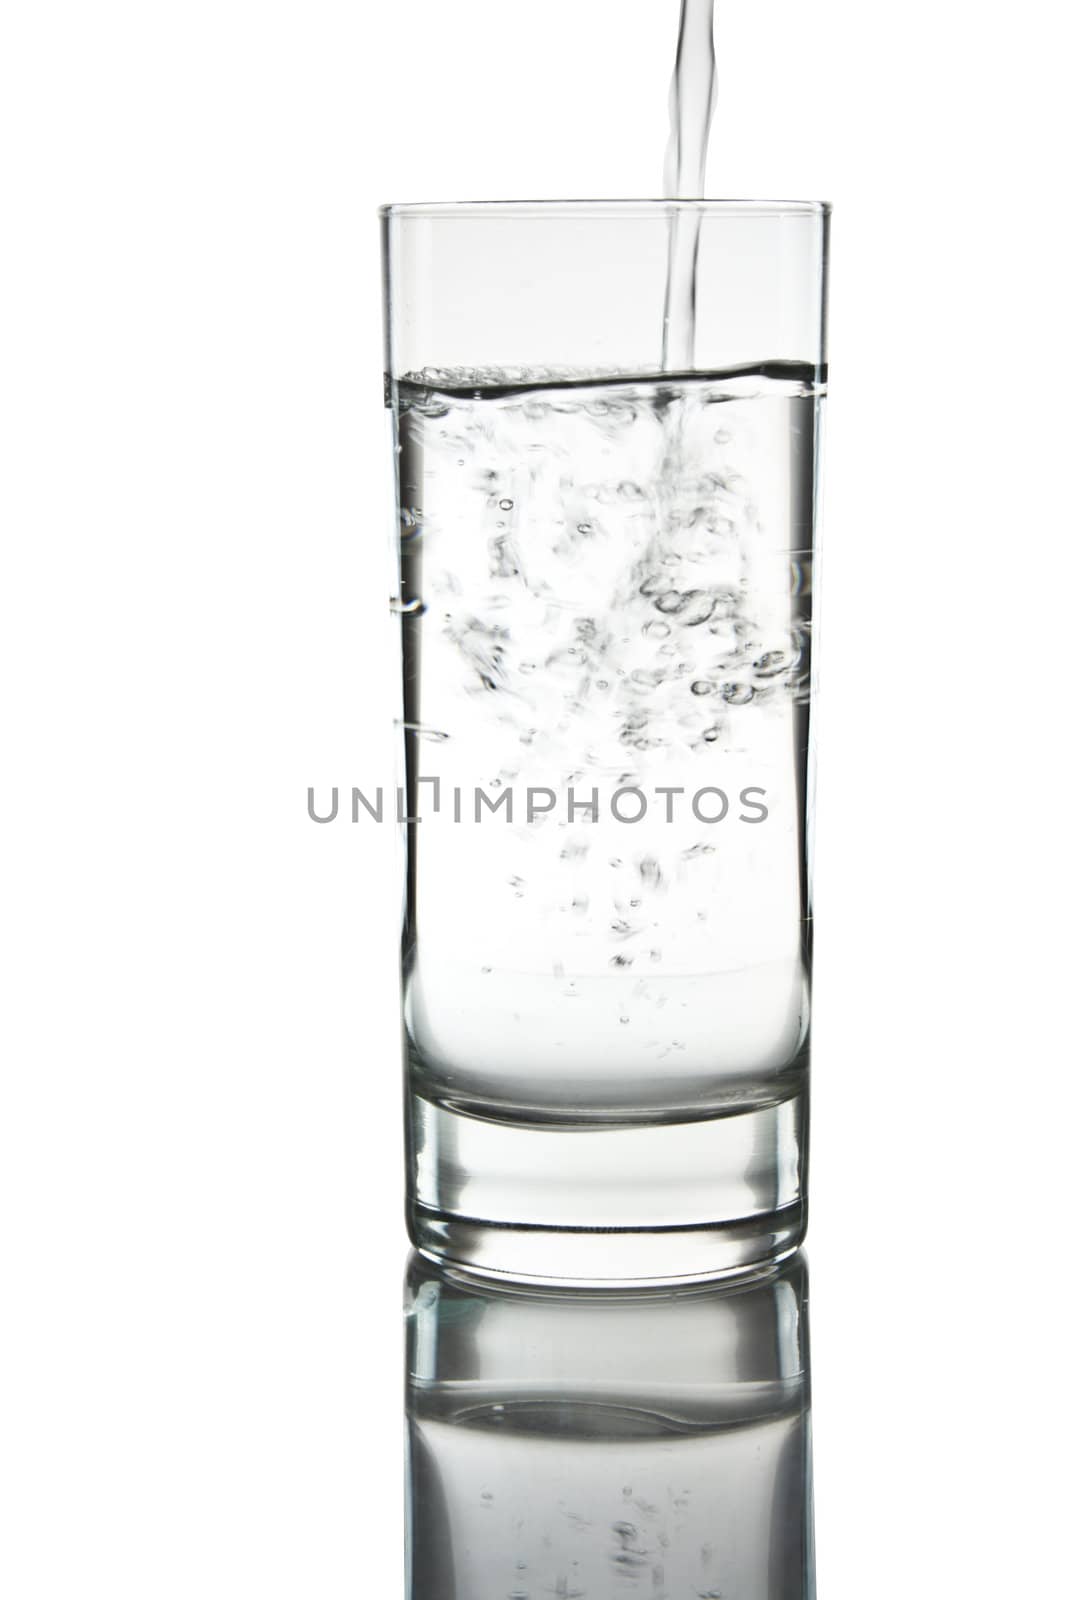 mineral water being poured into a glass